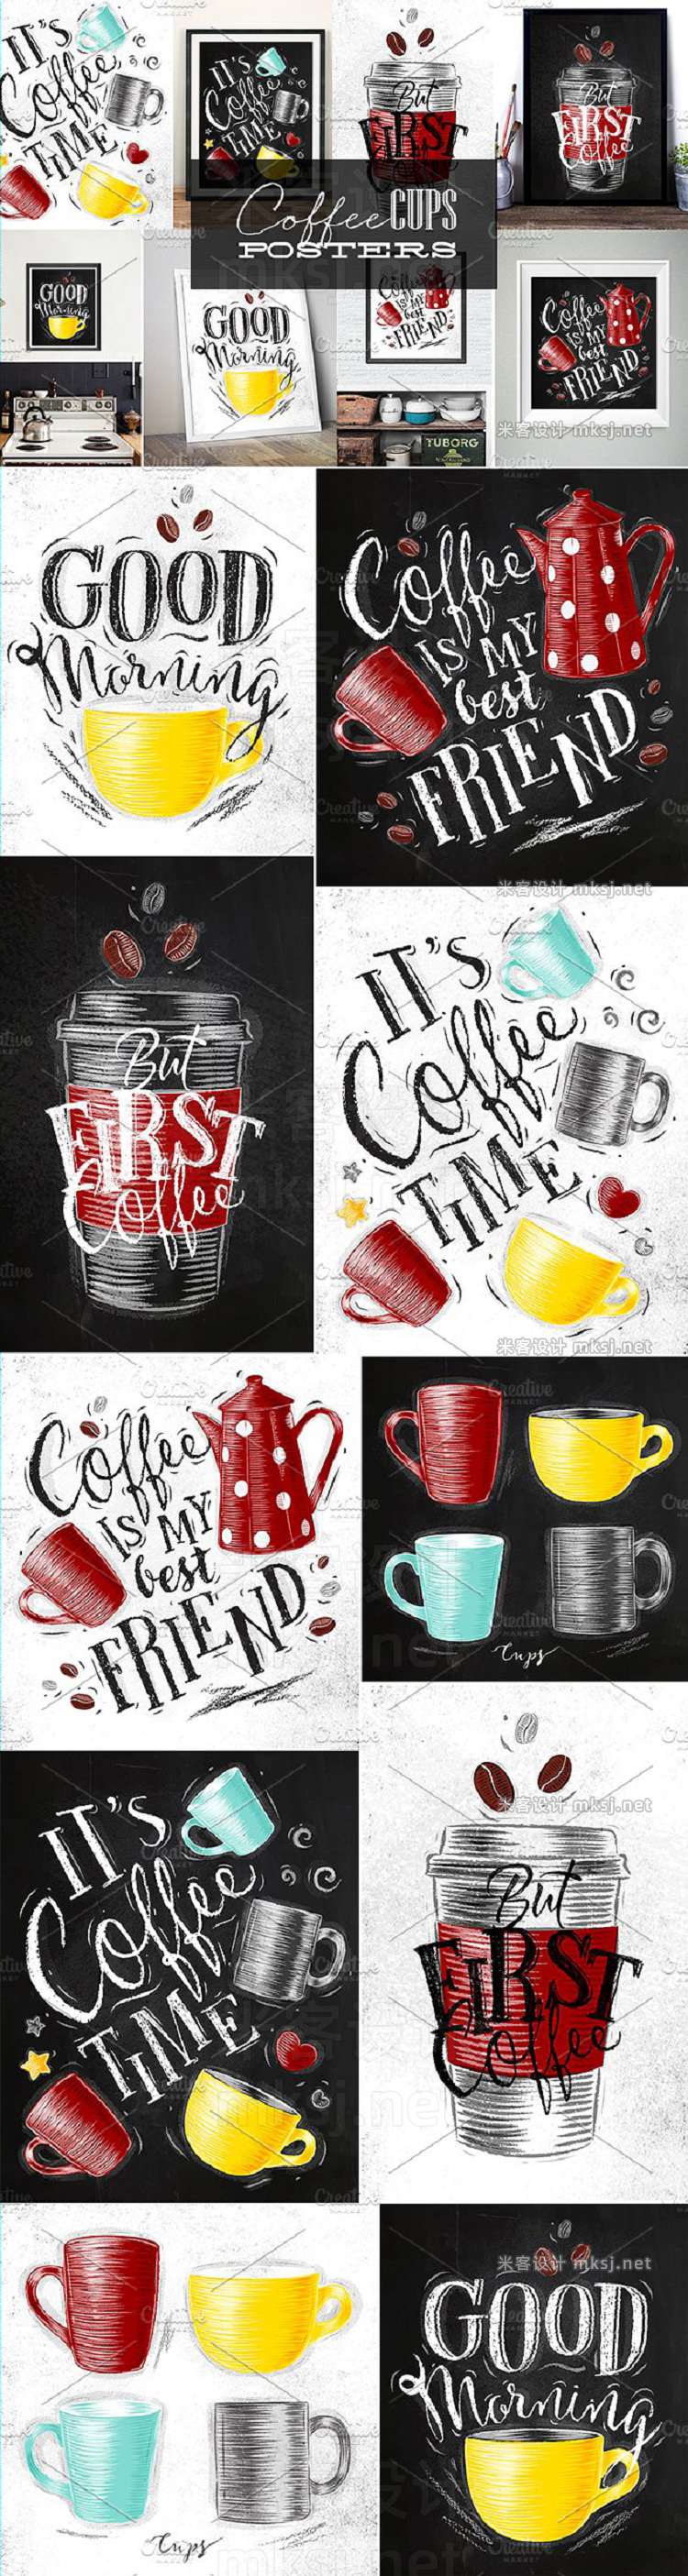 png素材 Coffee Cups Posters